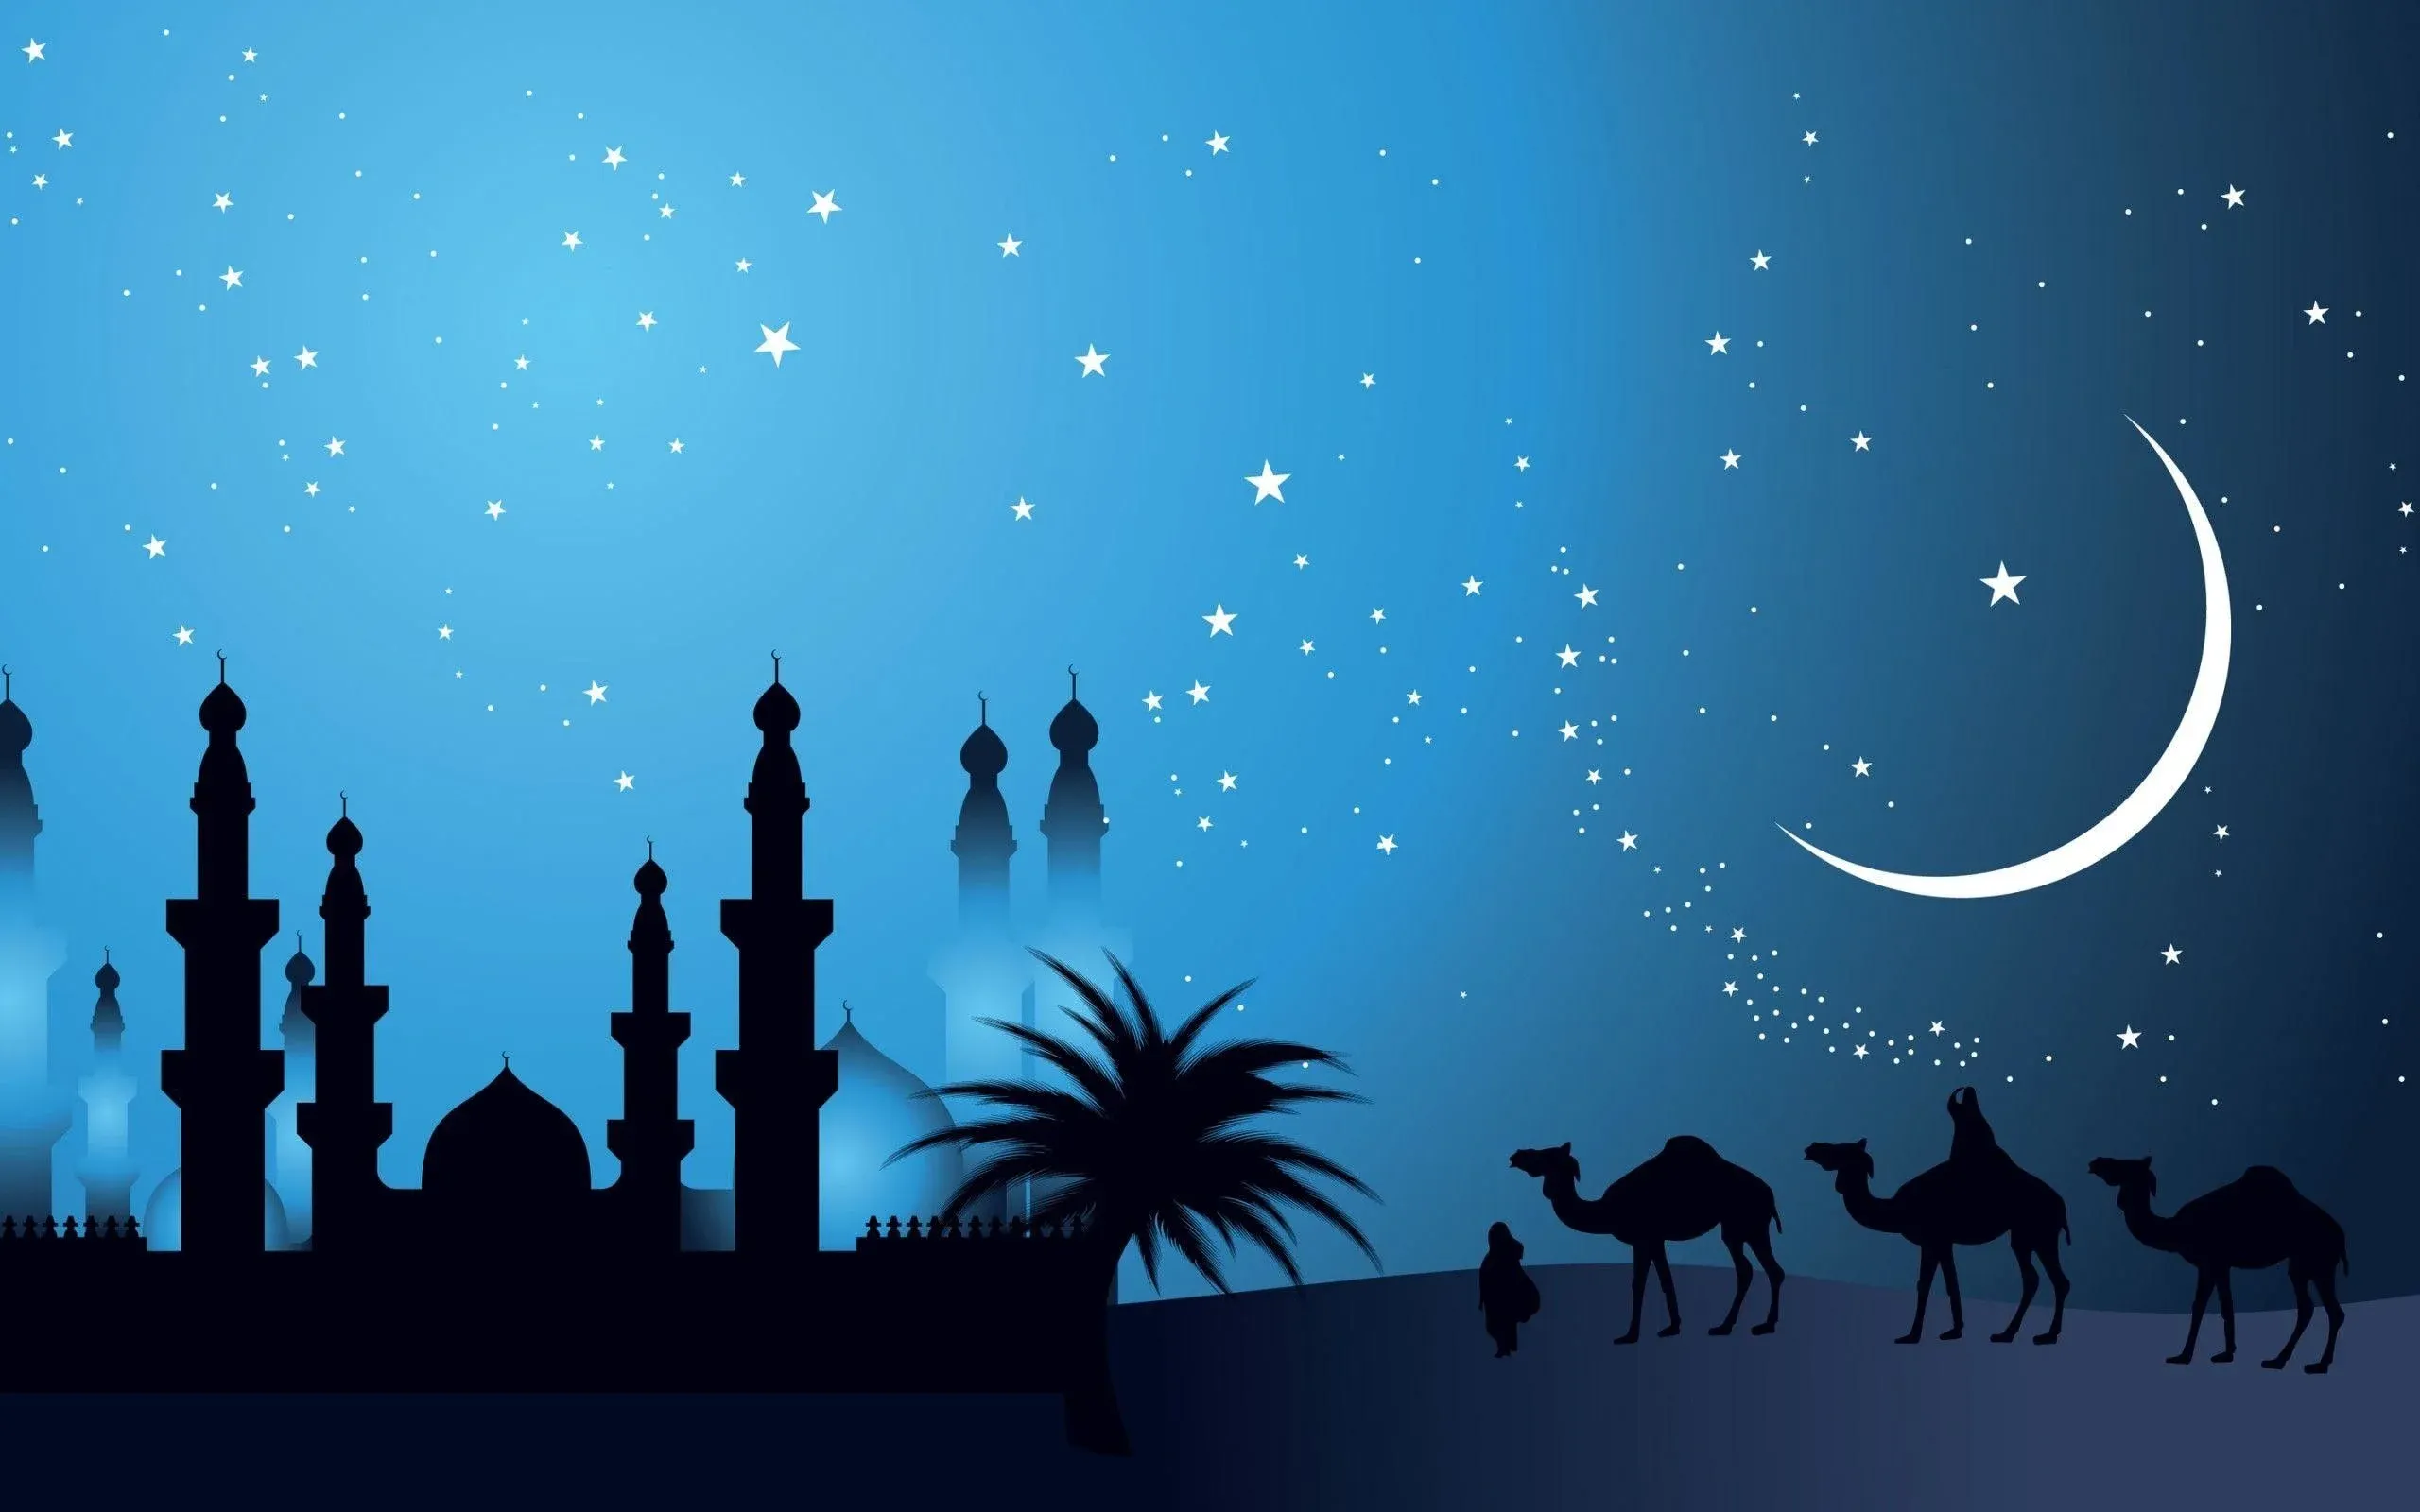 Islamic Background HD - Islamic Banner Background - Islamic Thumbnail Background - Free islamic background - NeotericIT.com